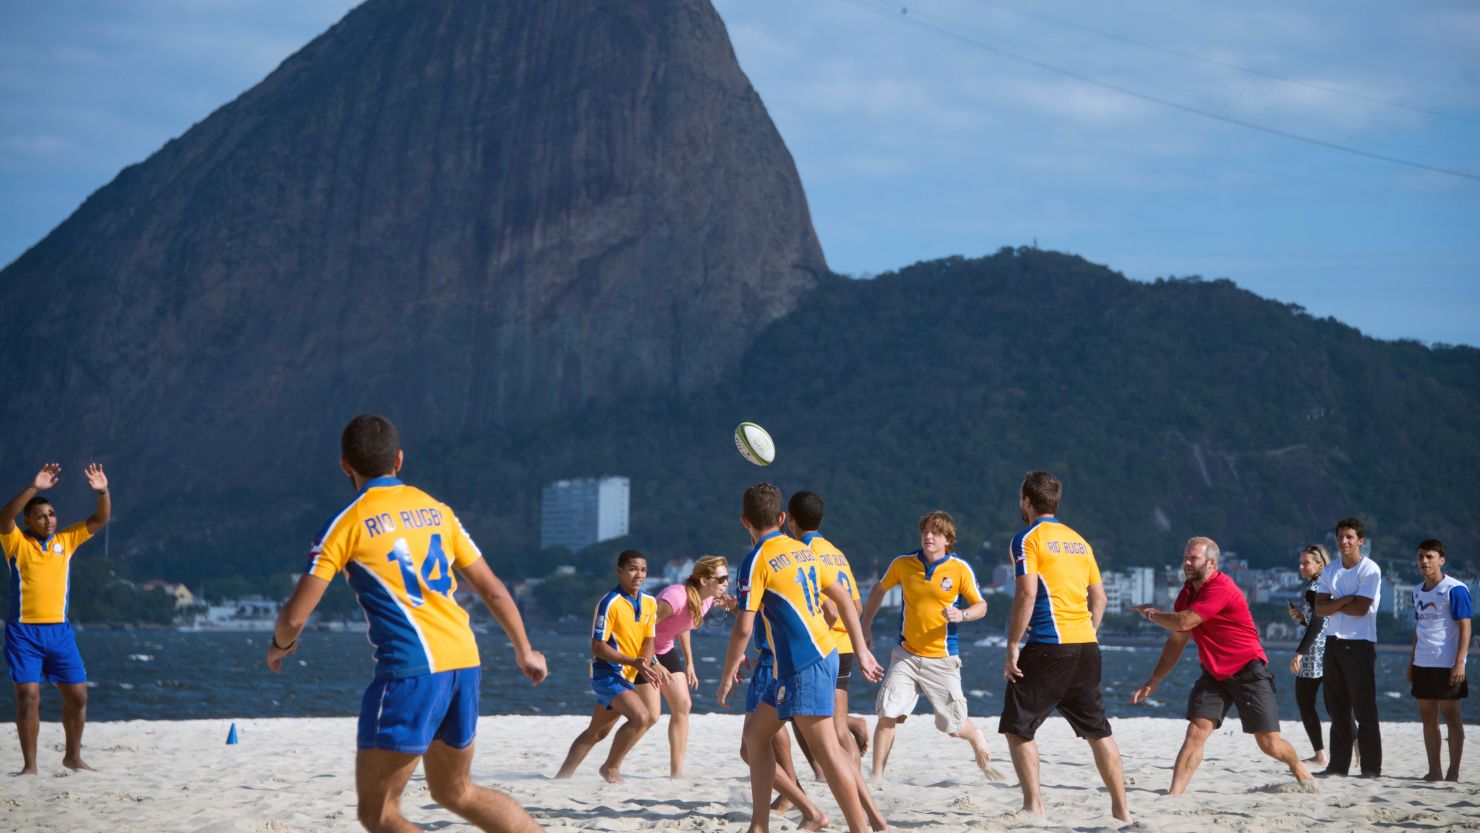 Rugby has become increasingly popular from Copacabana Beach to the rugby pitches of Rio de Janeiro and elsewhere